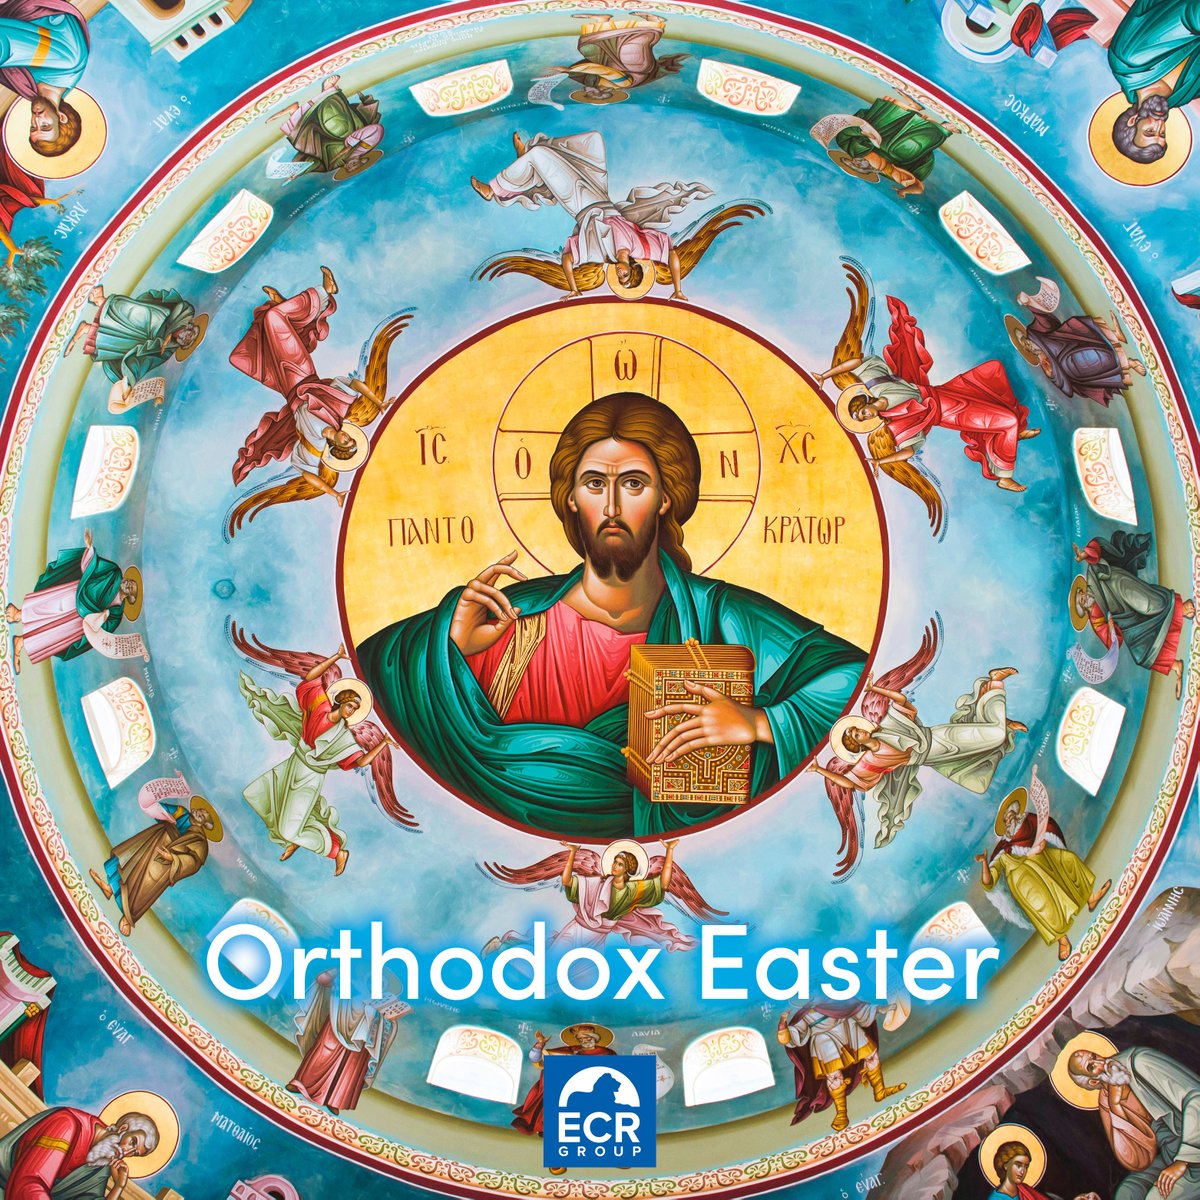 Christ is risen! He is risen indeed! The ECR Group wishes all those celebrating today joyous and blessed Orthodox Easter! May this sacred day be filled with love, peace, and renewal. #OrthodoxEaster #EasterSunday